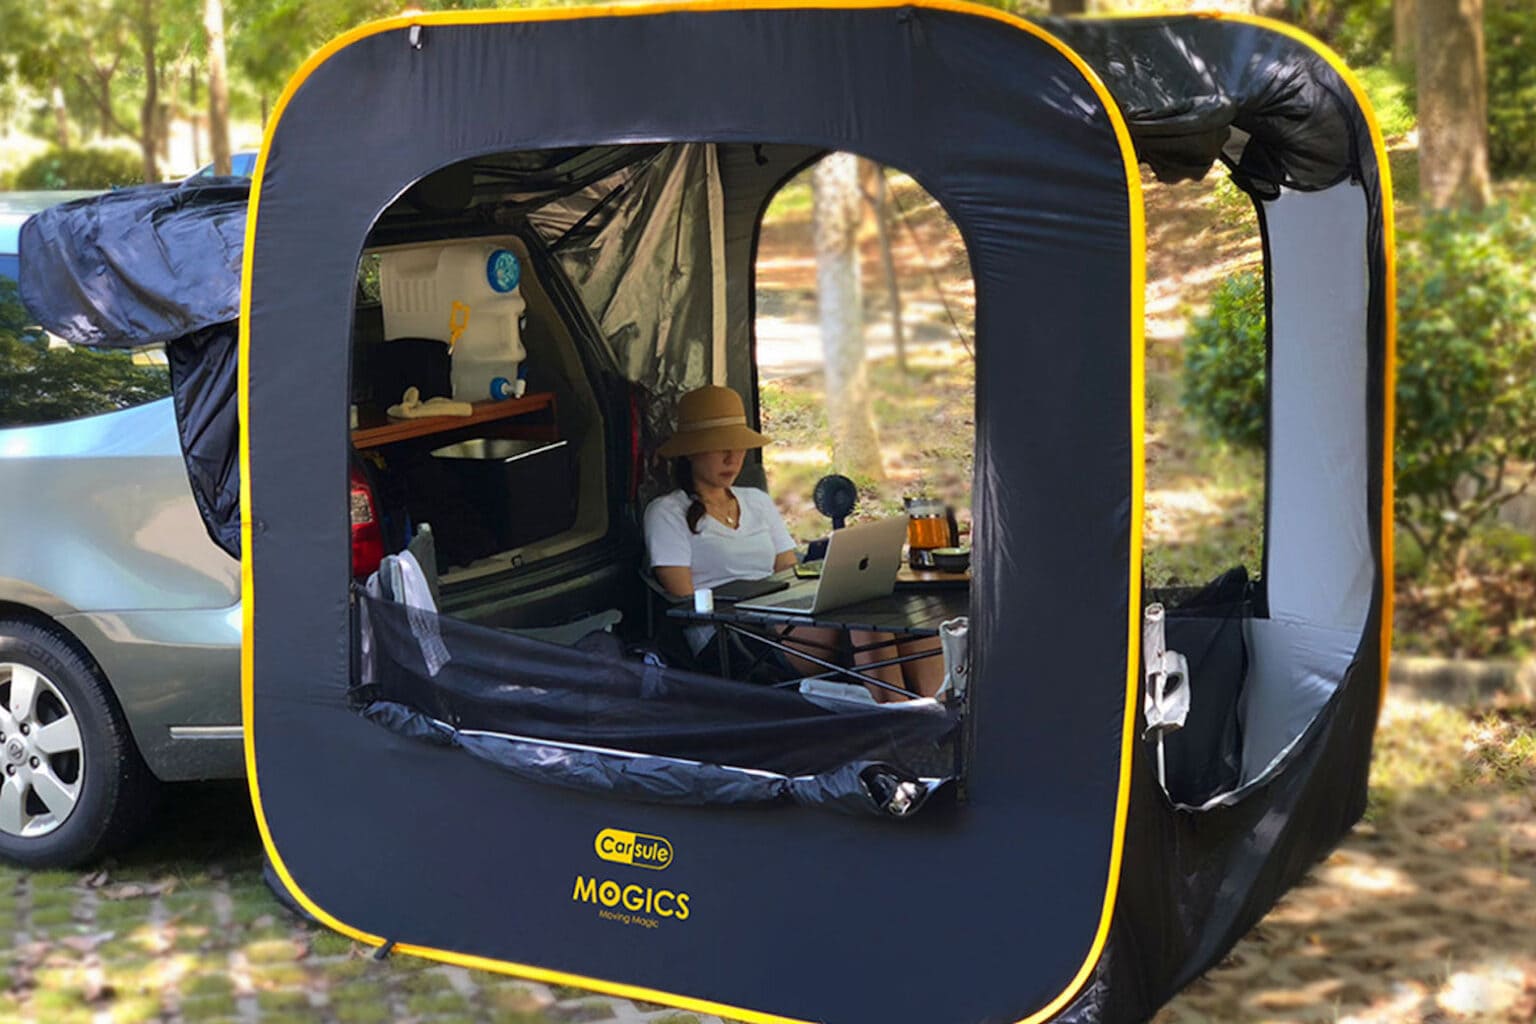 Take advantage of discounted pricing on this pop-up cabin that attaches to your car.